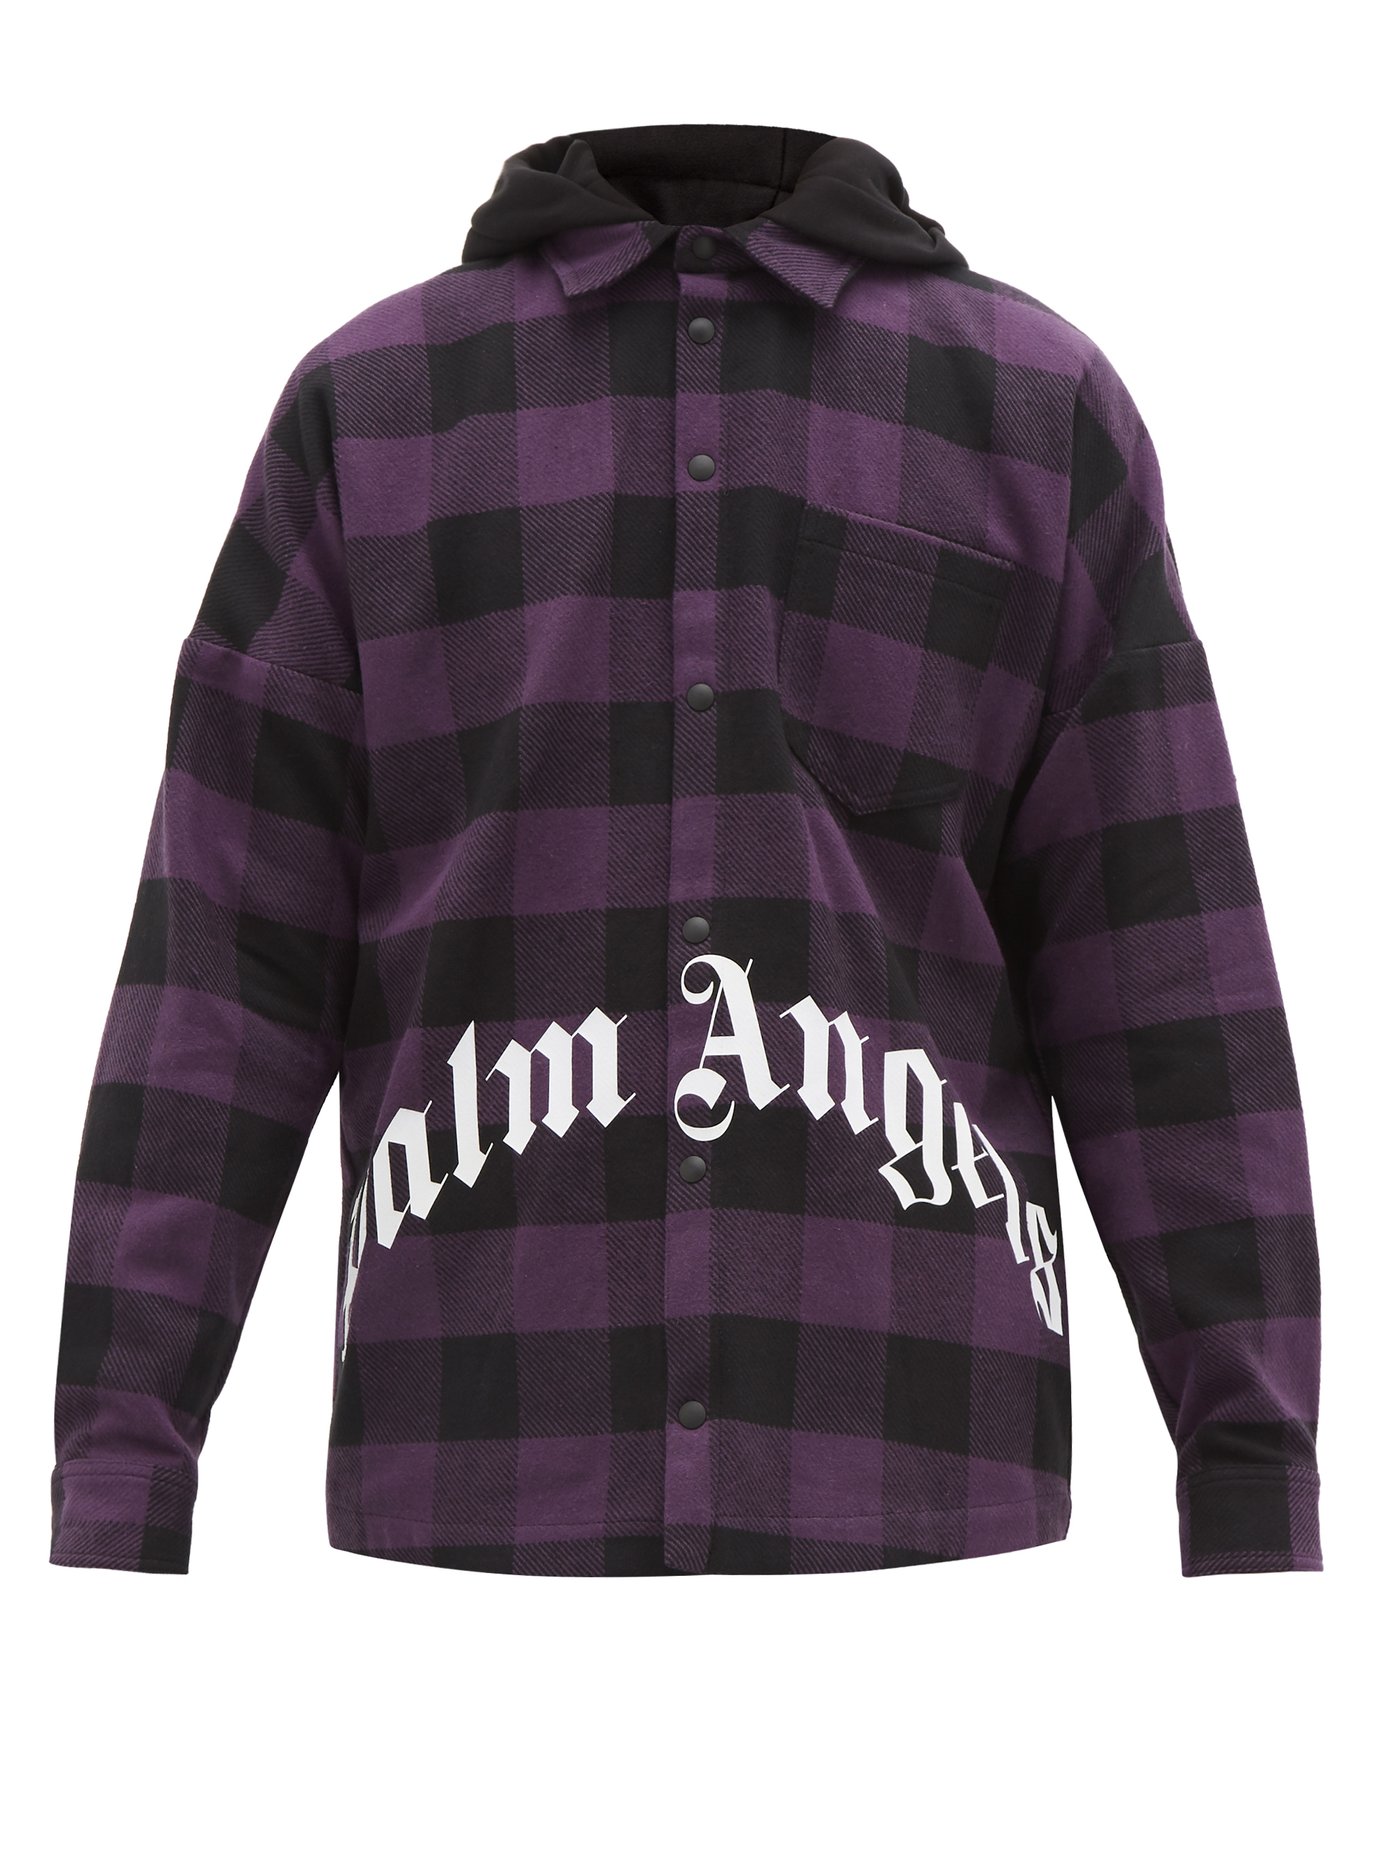 palm angels flannel